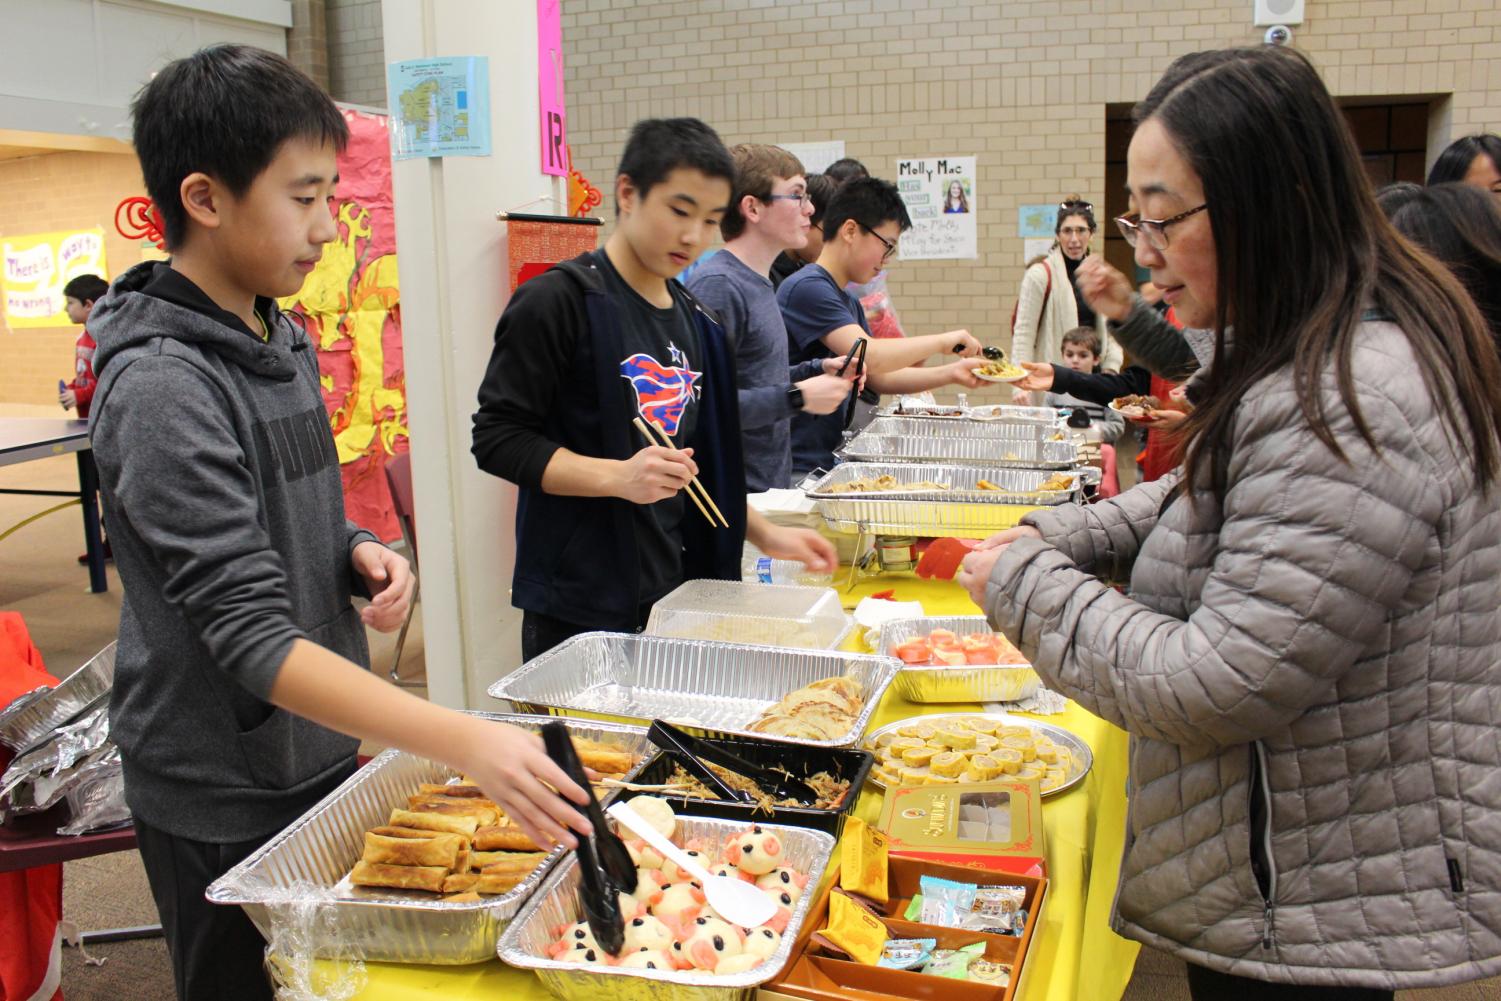 Andrew Wang '22 and other enthusiastic Chinese club volunteers served homemade Chinese food in exchange for tickets.  Spring rolls, bao zi, and scallion pancakes were all part of their authentic cuisine, which attending families and students enjoyed.